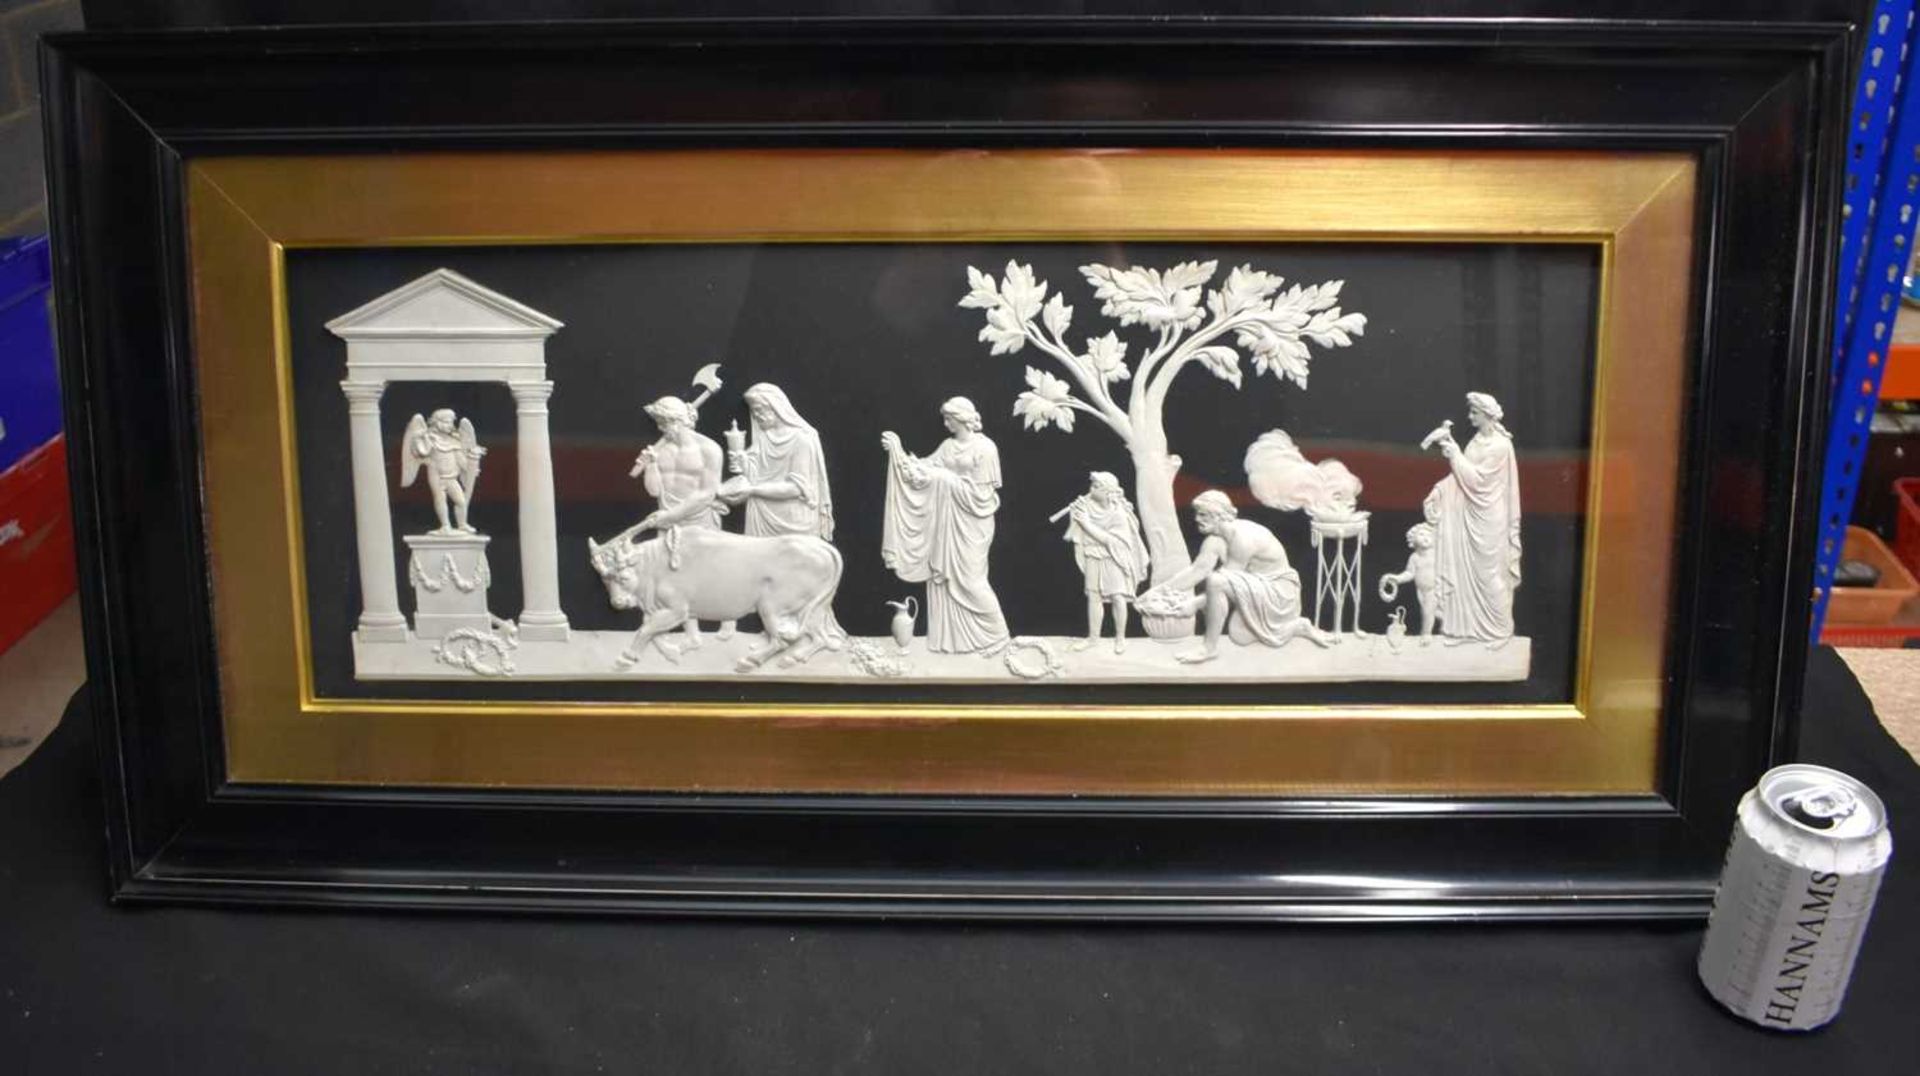 A RARE AND LARGE 19TH CENTURY WEDGWOOD BLACK BASALT PLAQUE depicting classical scenes of figures